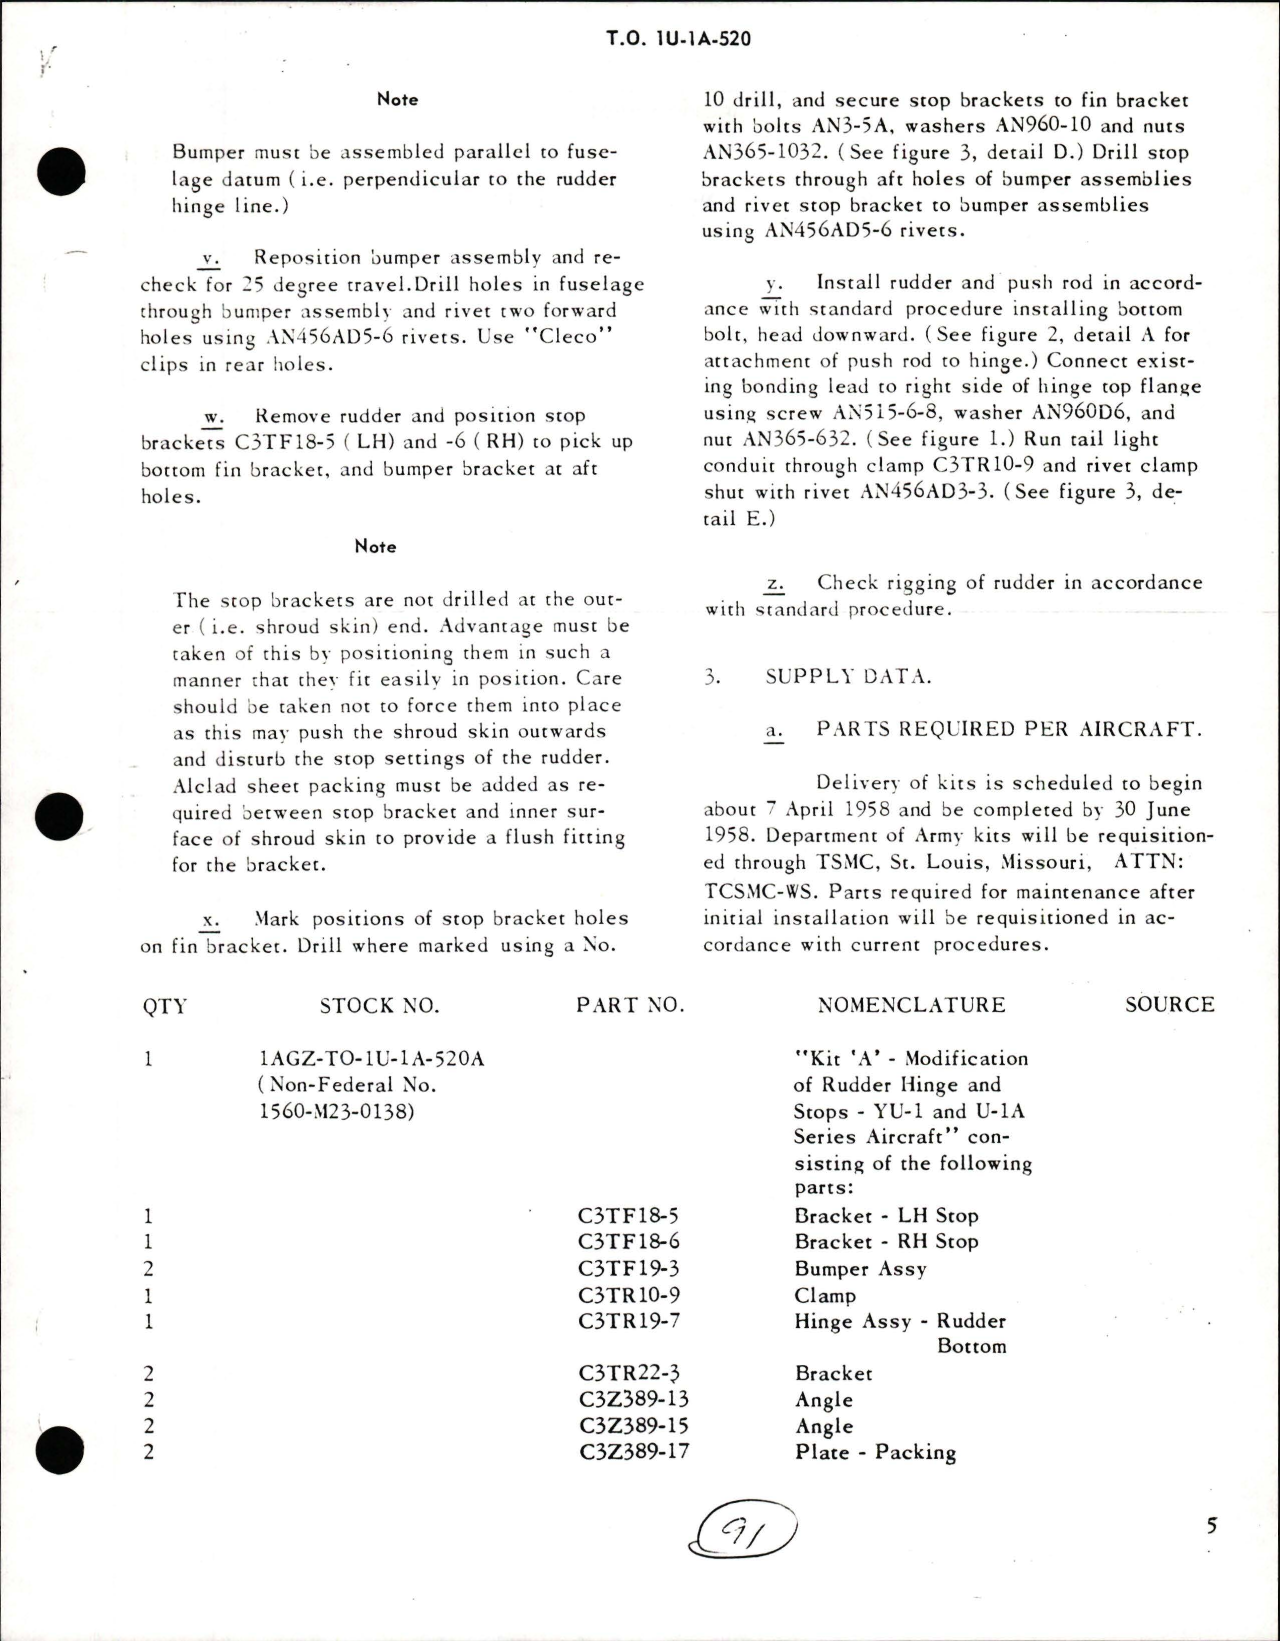 Sample page 5 from AirCorps Library document: Modification of Rudder Hinge & Stops on YU-1 and U-1A